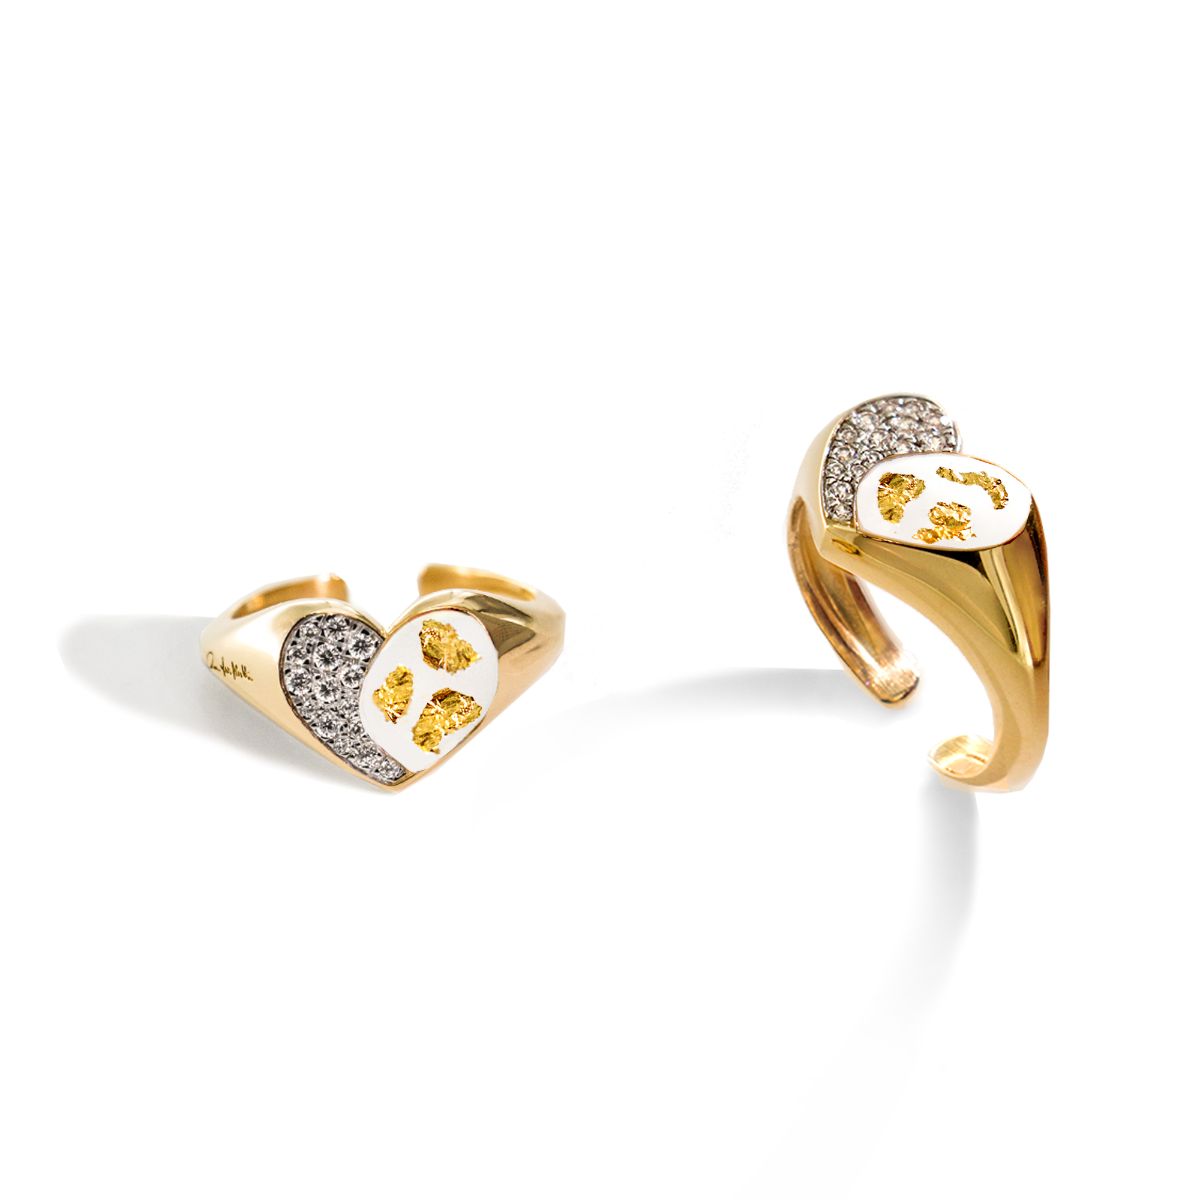 Rings - Chevalier heart ring -  Enamel and Gold Leaves - 1 | Rue des Mille